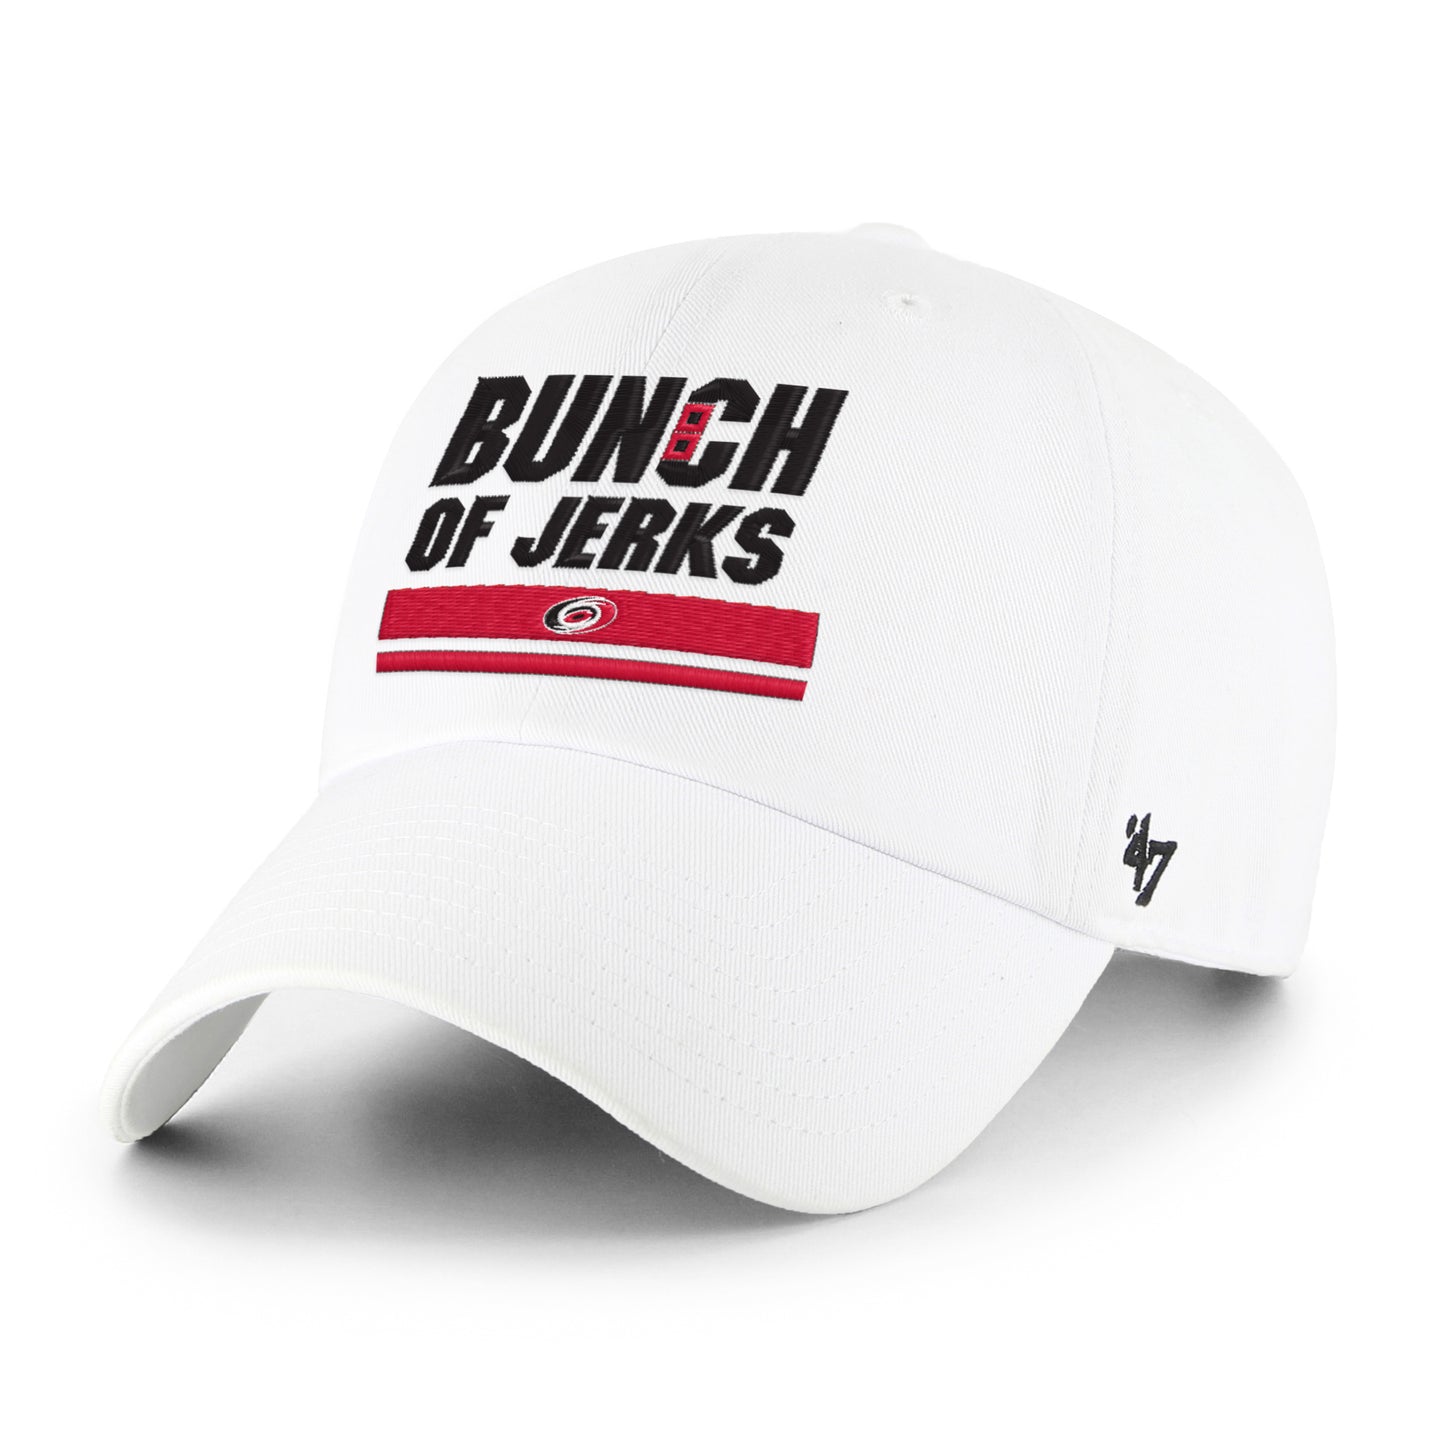 White hat with Bunch Of Jerks emblem on front and black 47 logo on side